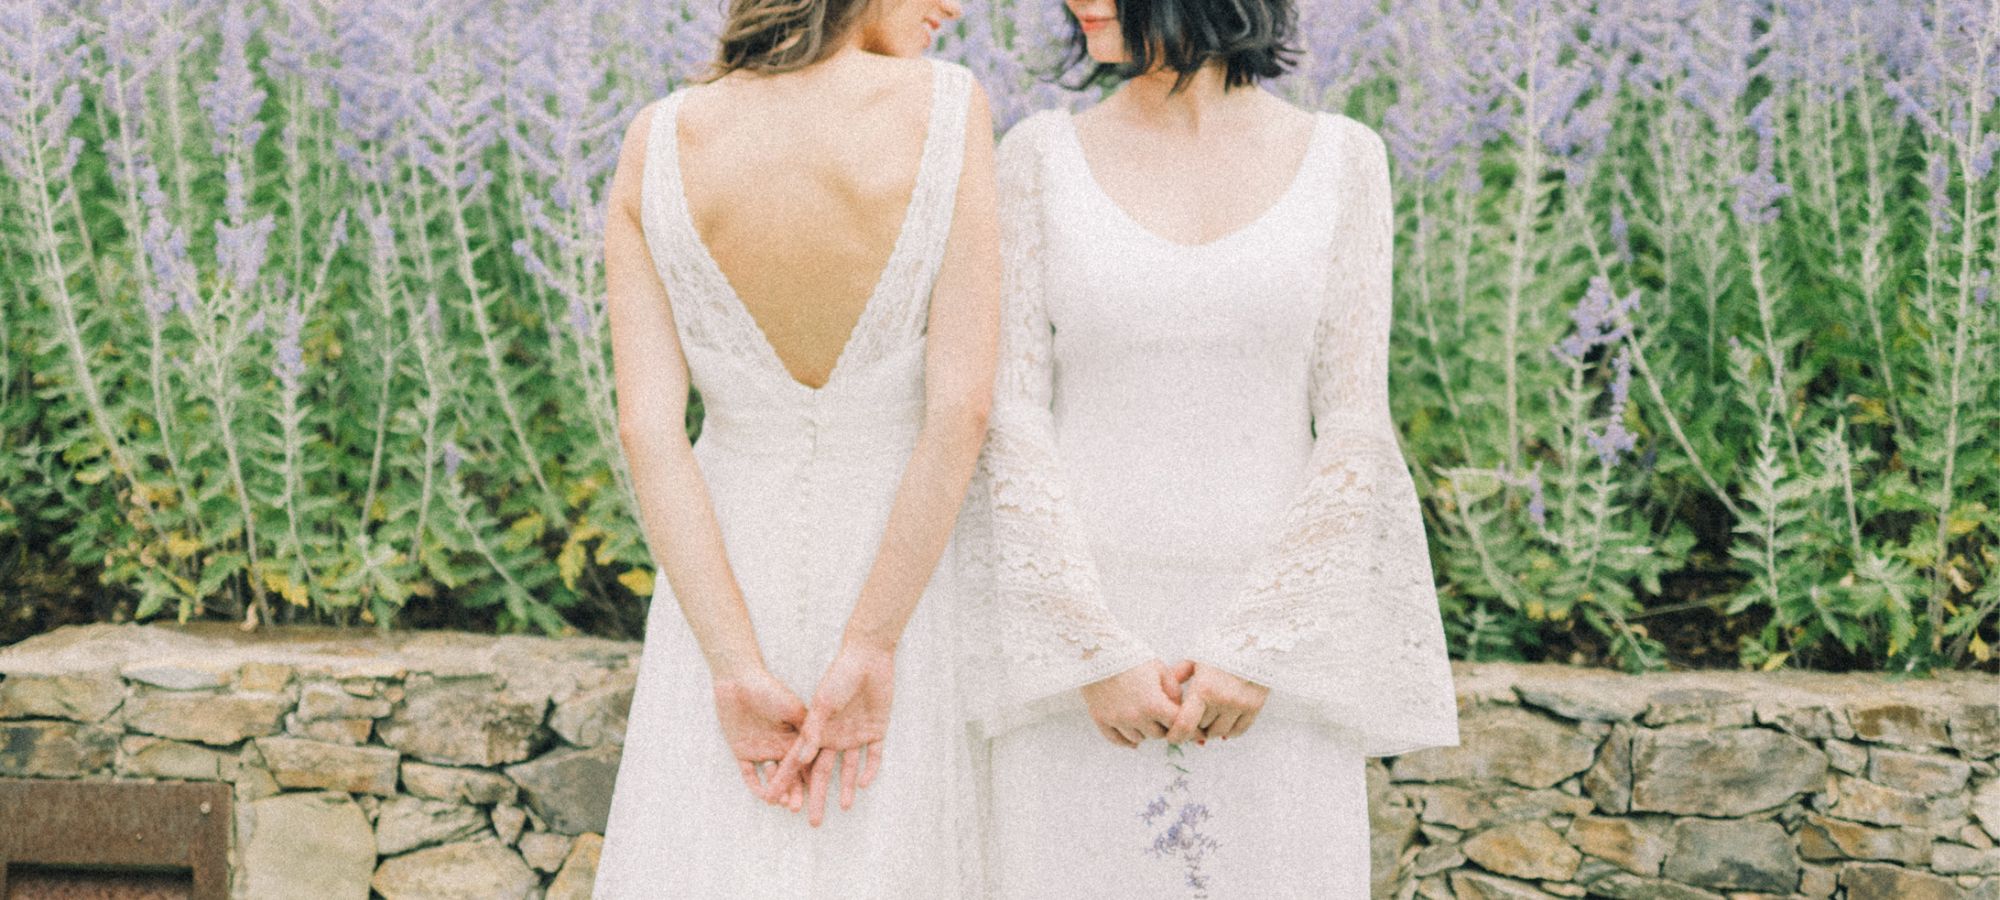 Wedding day tips from one bride to another